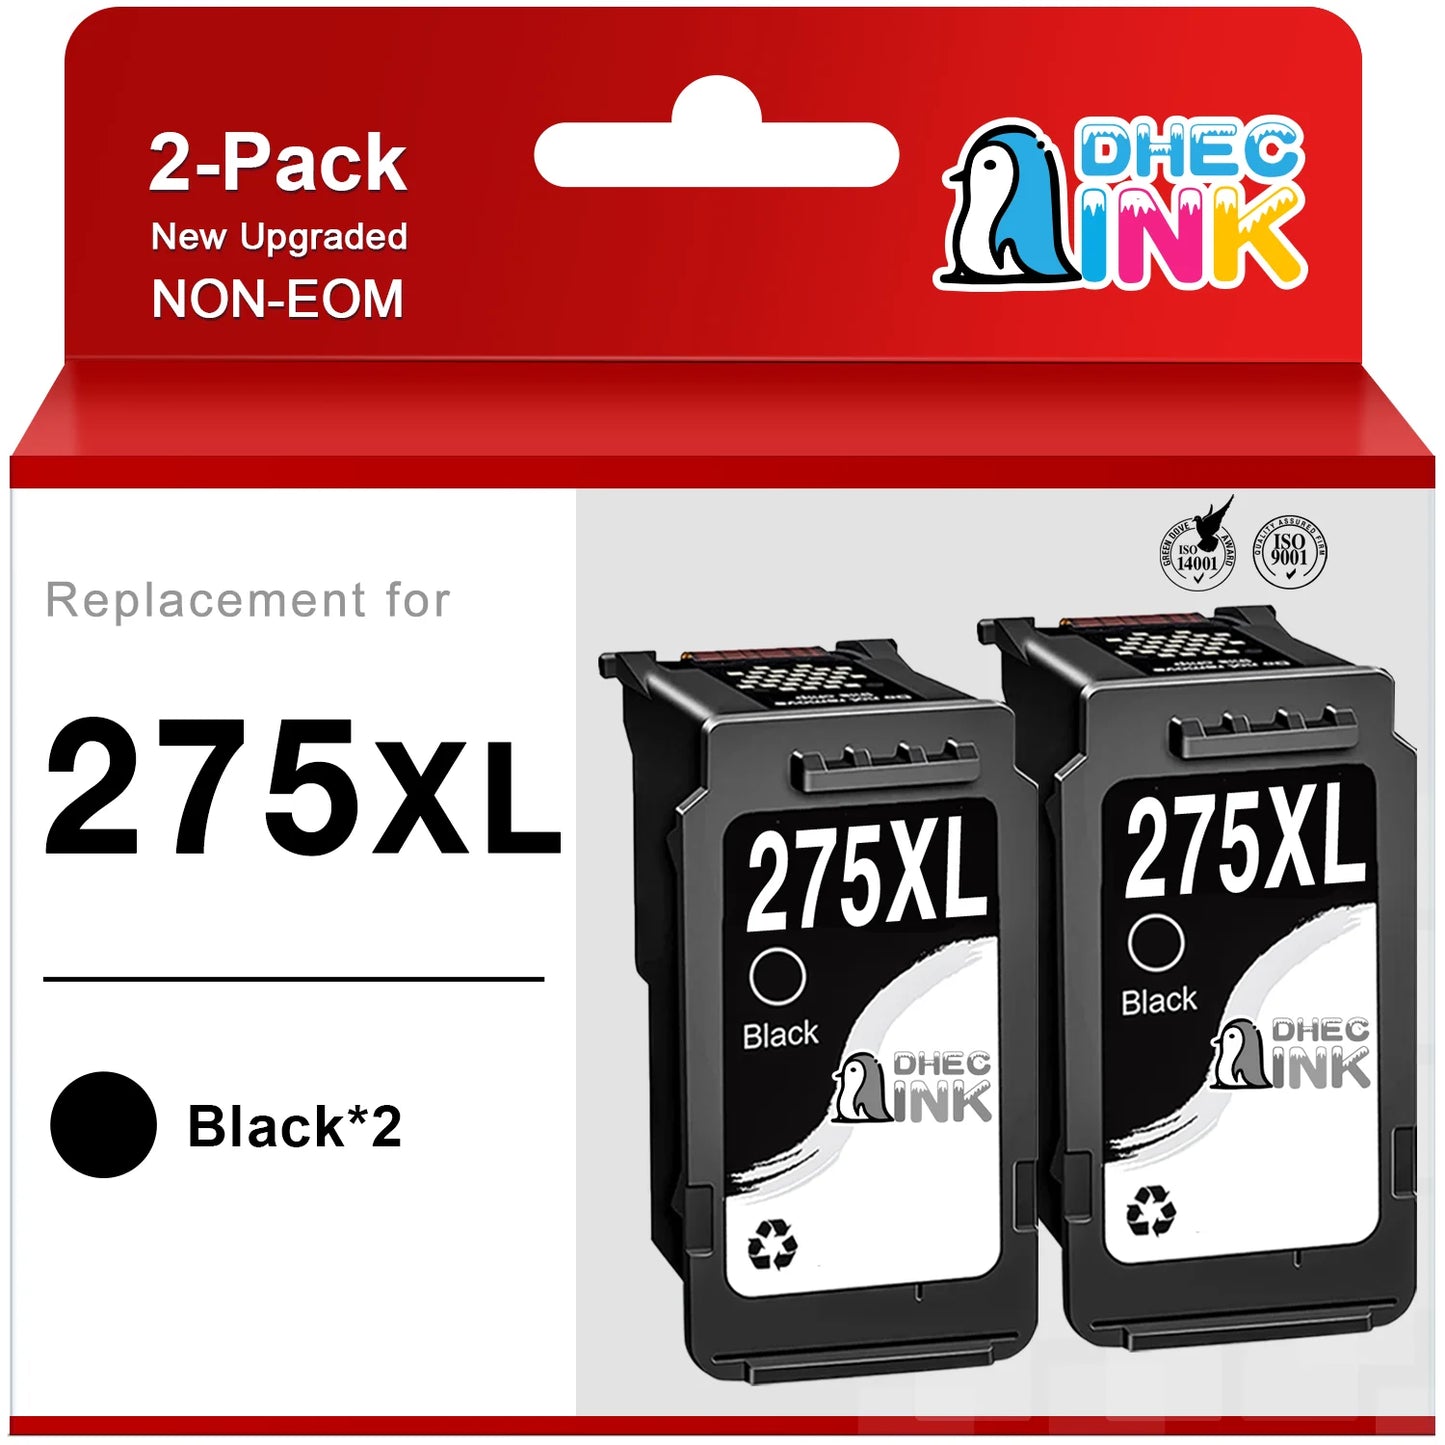 275XL Ink Cartridge for Canon Ink 275 XL 275XL PG-275XL PG-275 Black Ink for Canon Pixma TS3522 TR4720 TS3500 TS3520 TR4700 TR4722 Printer (2 Black)